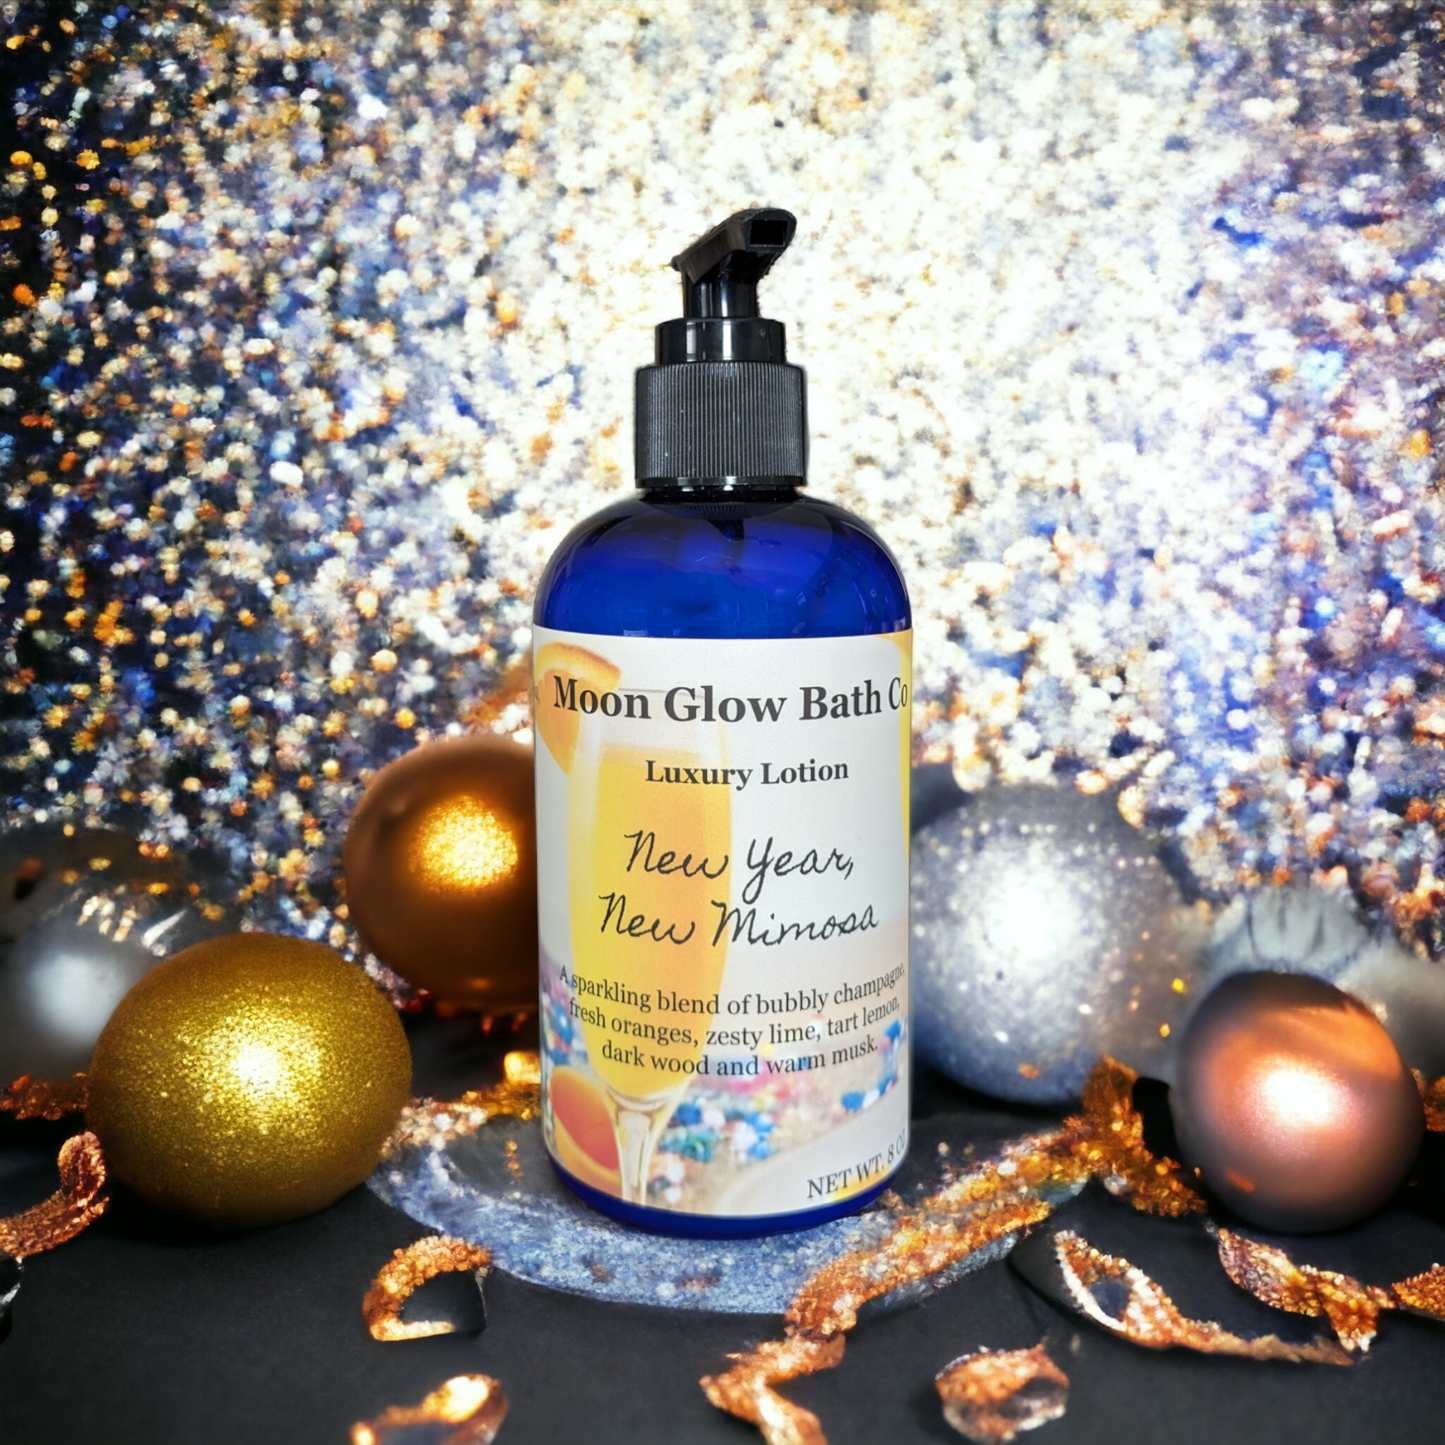 New Year, New Mimosa Luxury Lotion